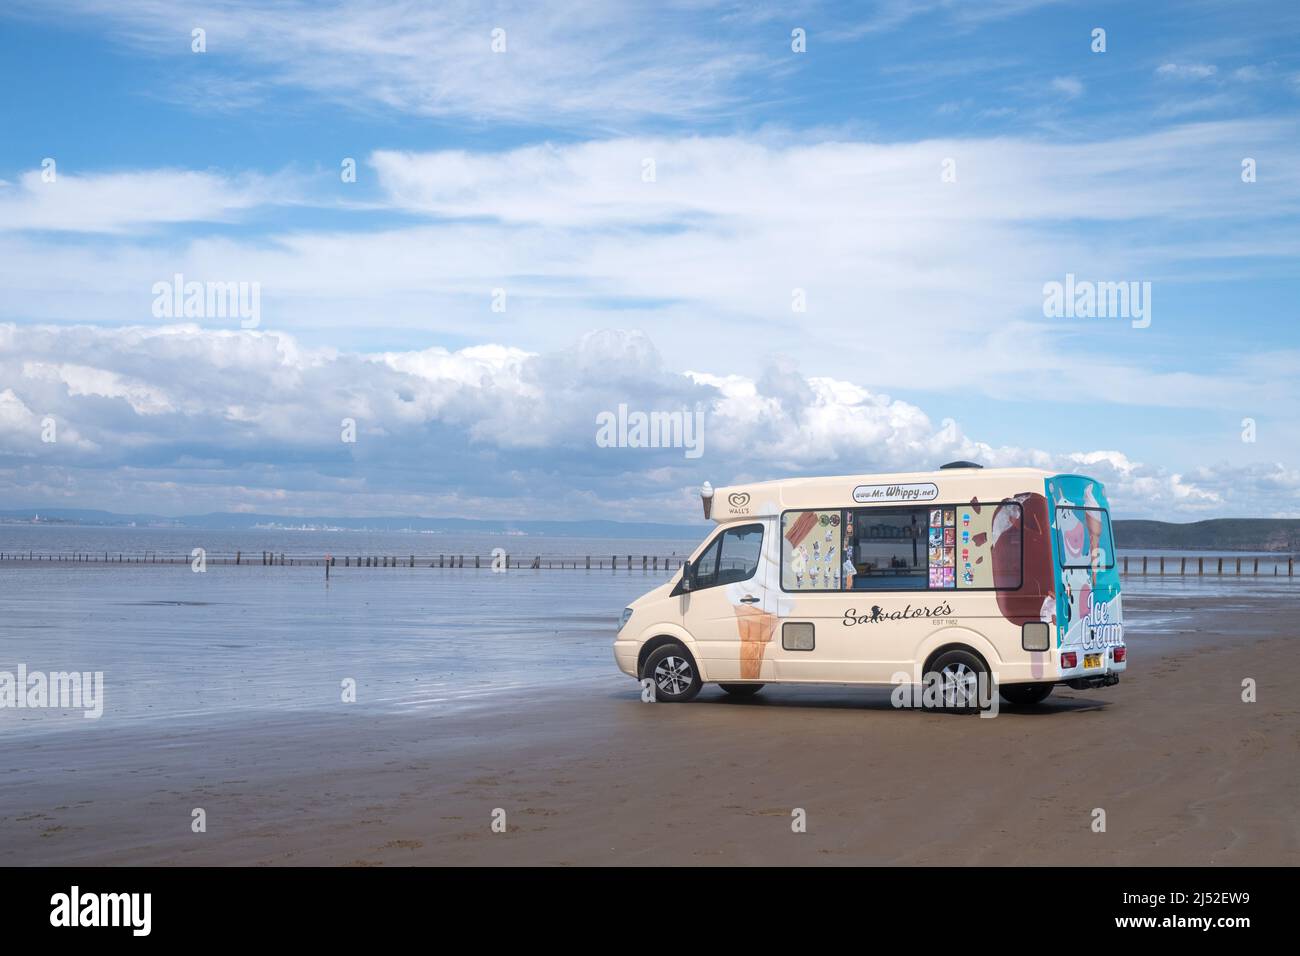 A traditional English ice cream van is parked waiting for customers on a sandy beach at Brean. A seaside resort in the South west of the UK Stock Photo